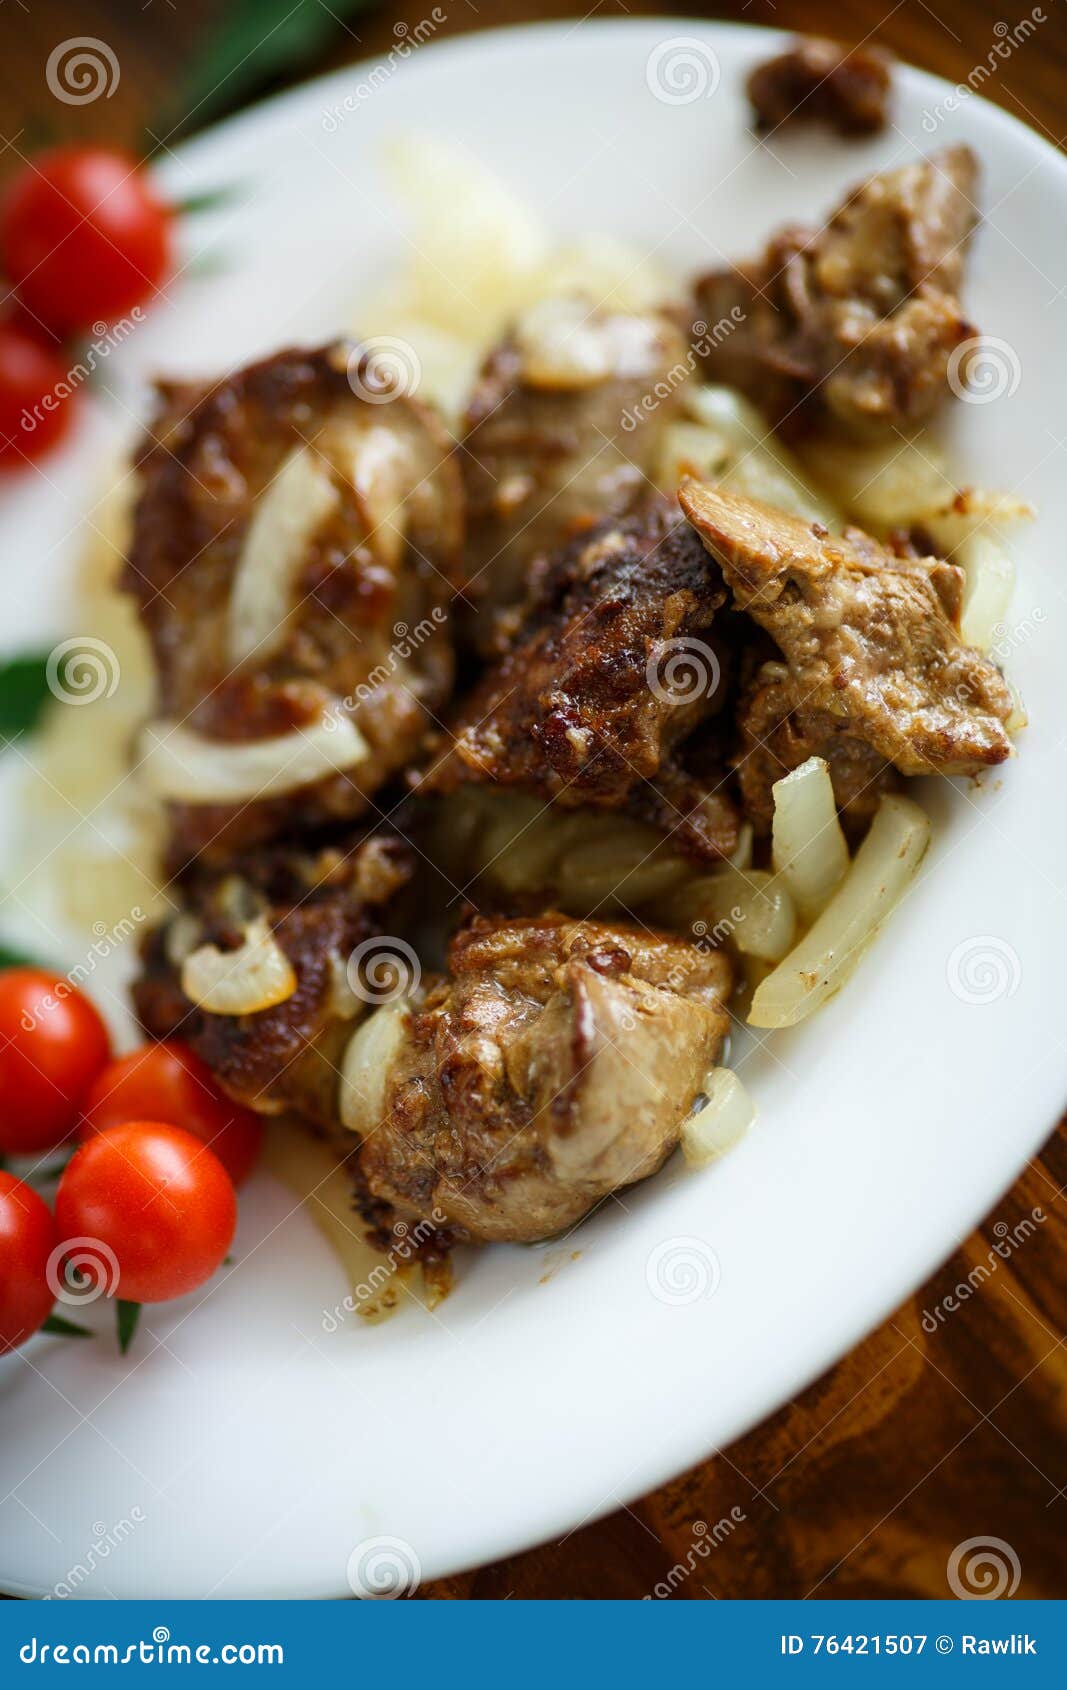 Fried Chicken Liver with Onions Stock Image - Image of liver, dinner ...